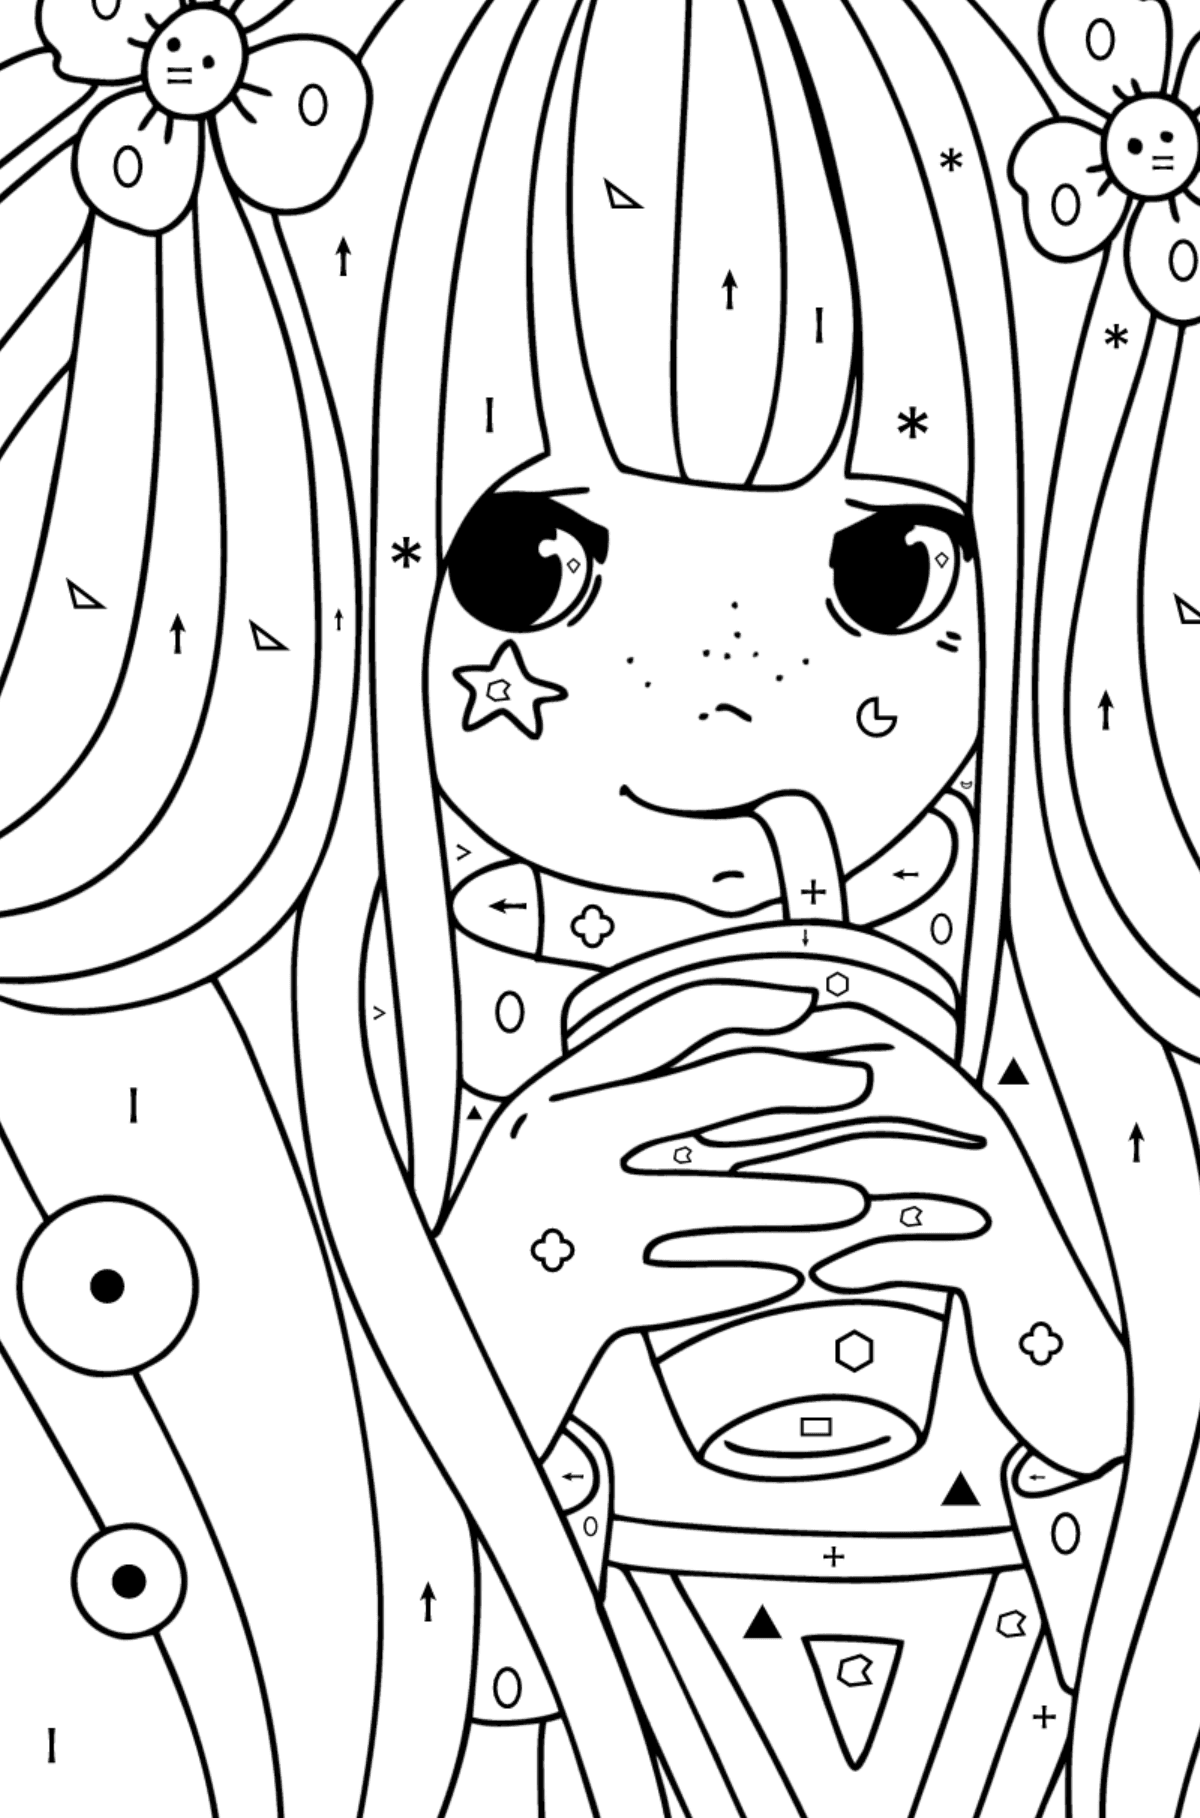 Girl anime fashionista coloring page - Coloring by Symbols and Geometric Shapes for Kids